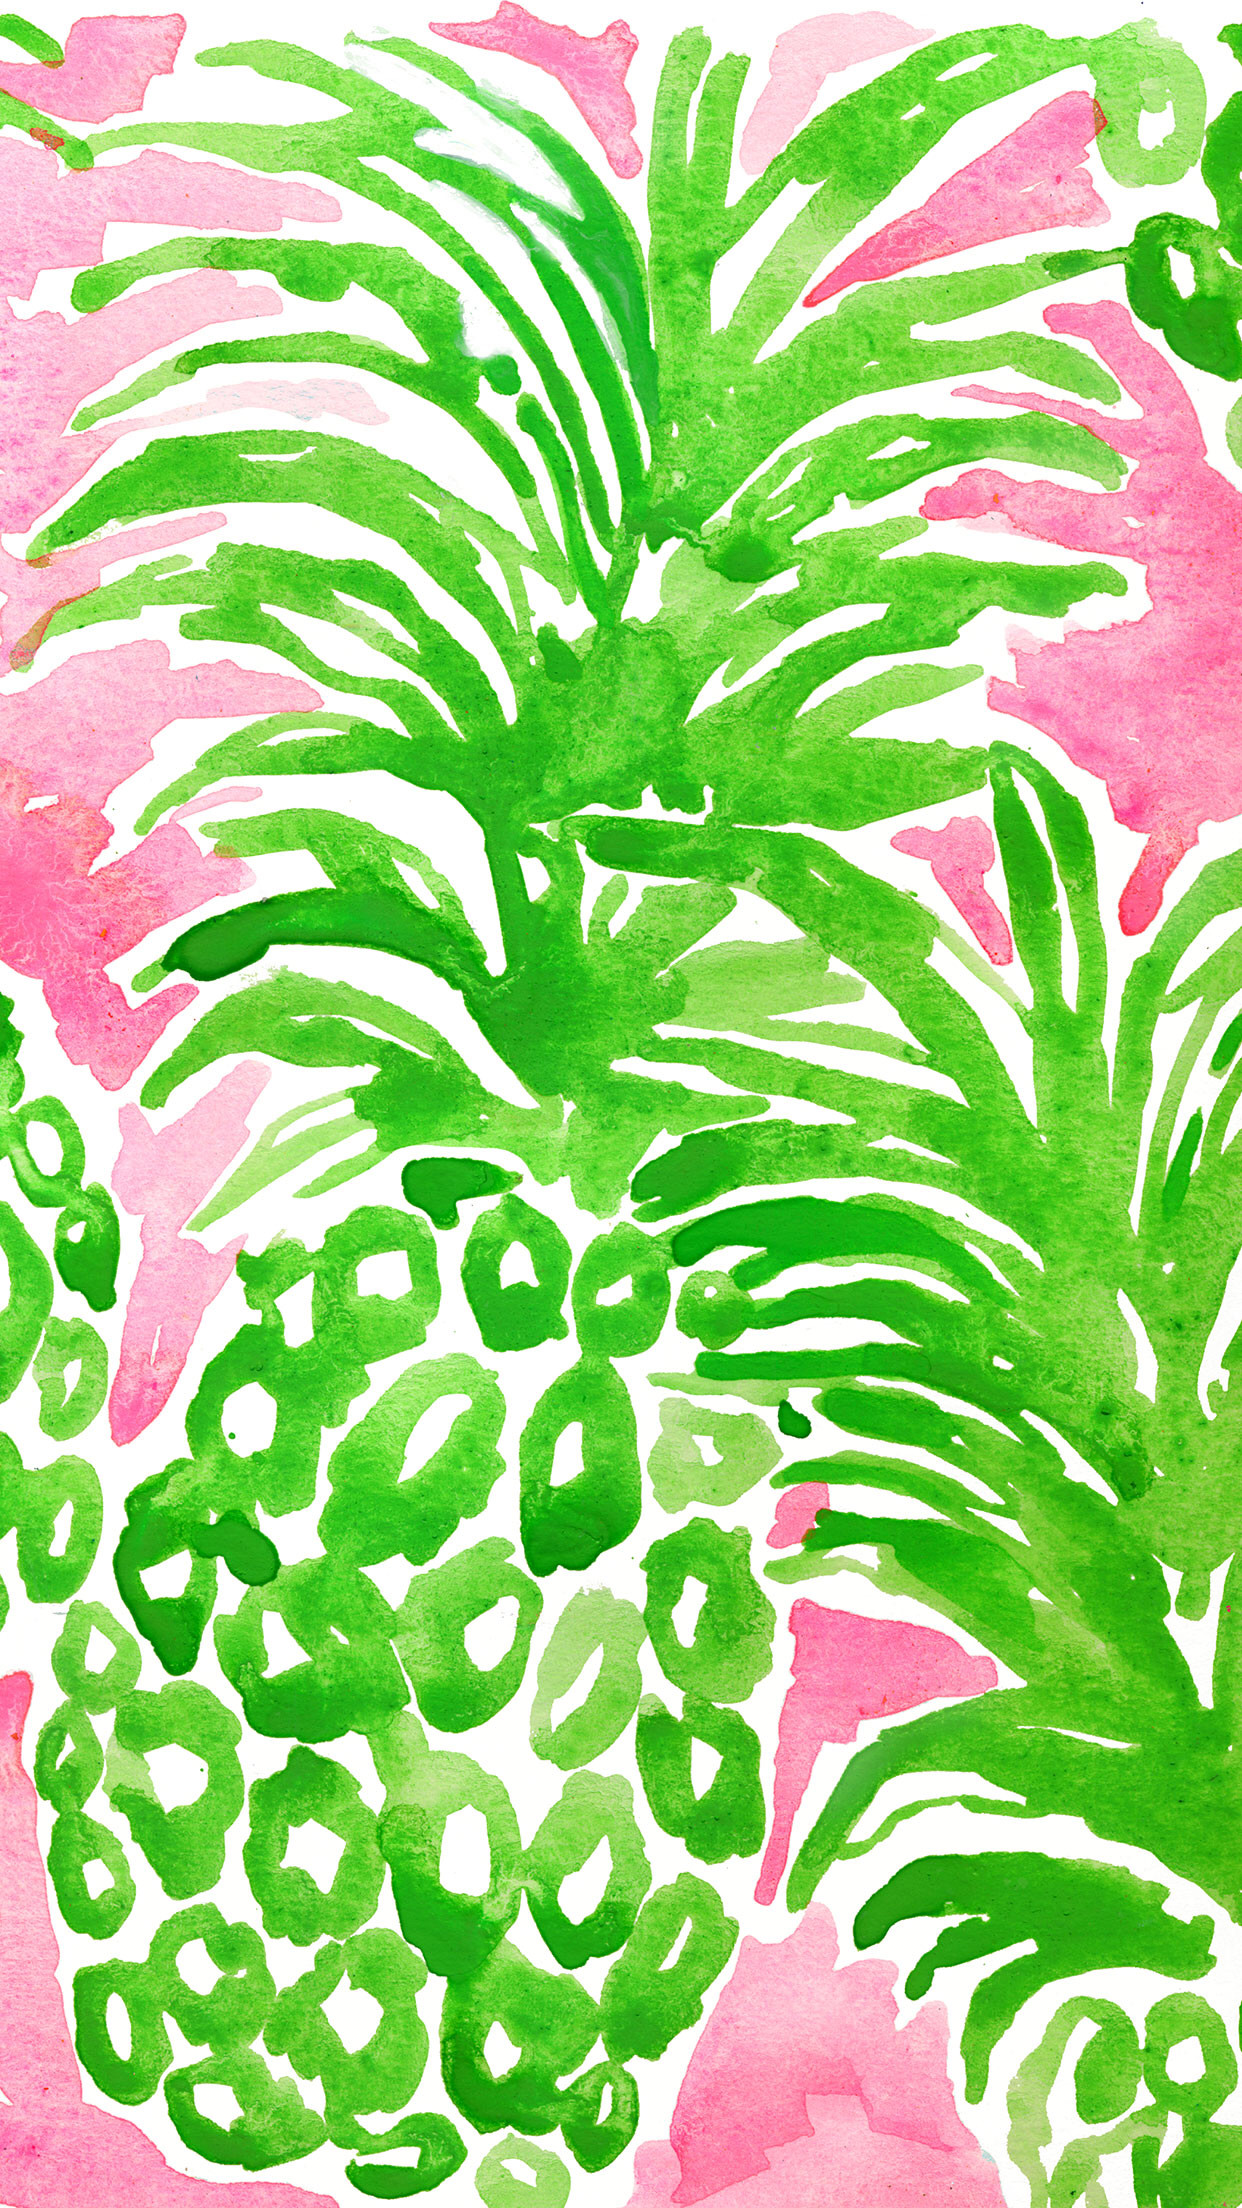 Let there be silence while this Lilly Pulitzer print does the talking :  Flamenco.